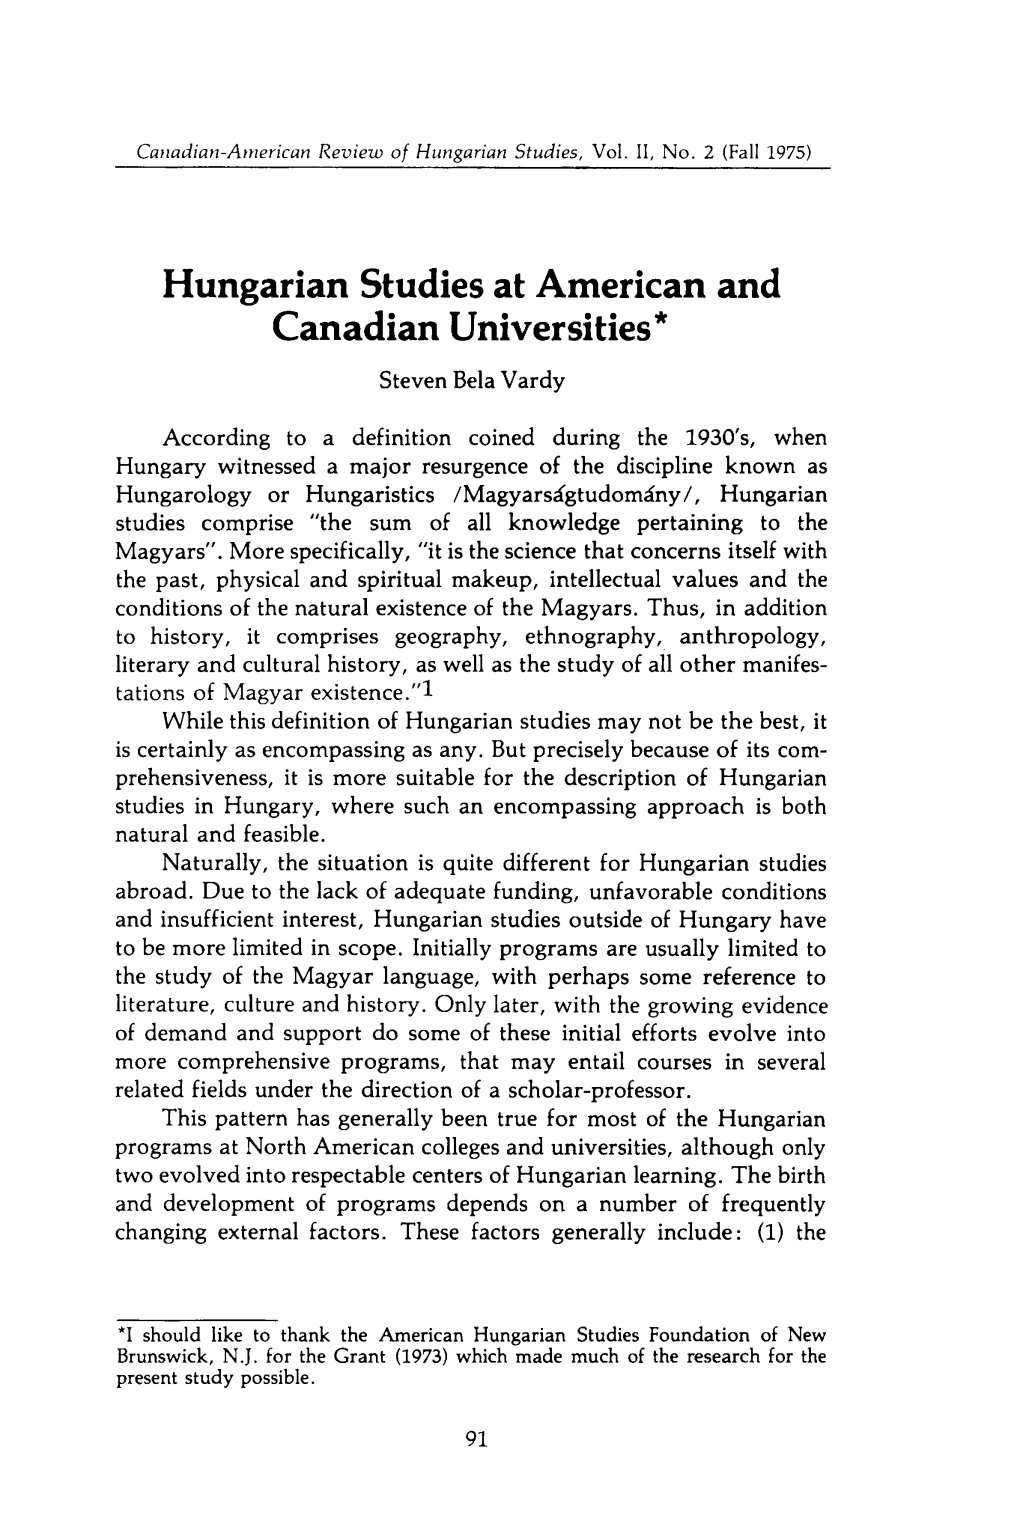 The Canadian-American Review of Hungarian Studies Appeared on the Scene, Under the Editorship of Professor N.F